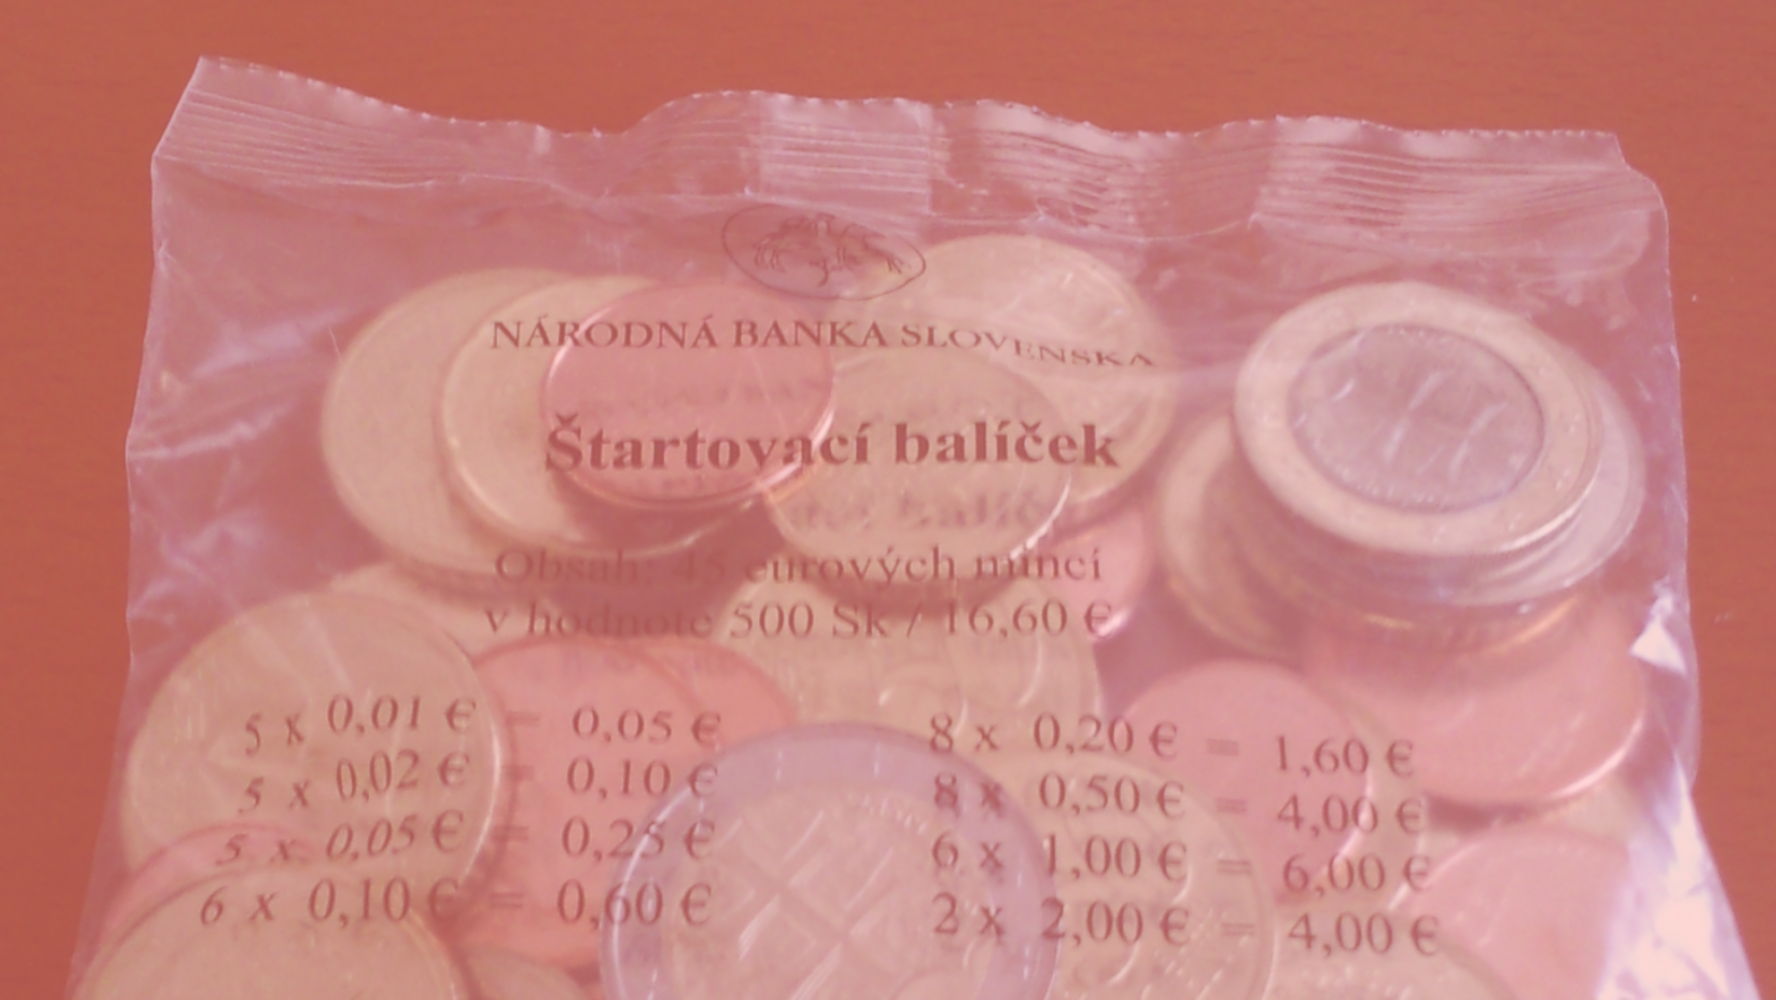 Episode title 'The Papers: Big Tech Lobbying' on a semi-transparent salmon-coloured background. A plastic bag with Euro coins and Slovak text on printed on it shines through. Vulnerable by Design logo in the top left.